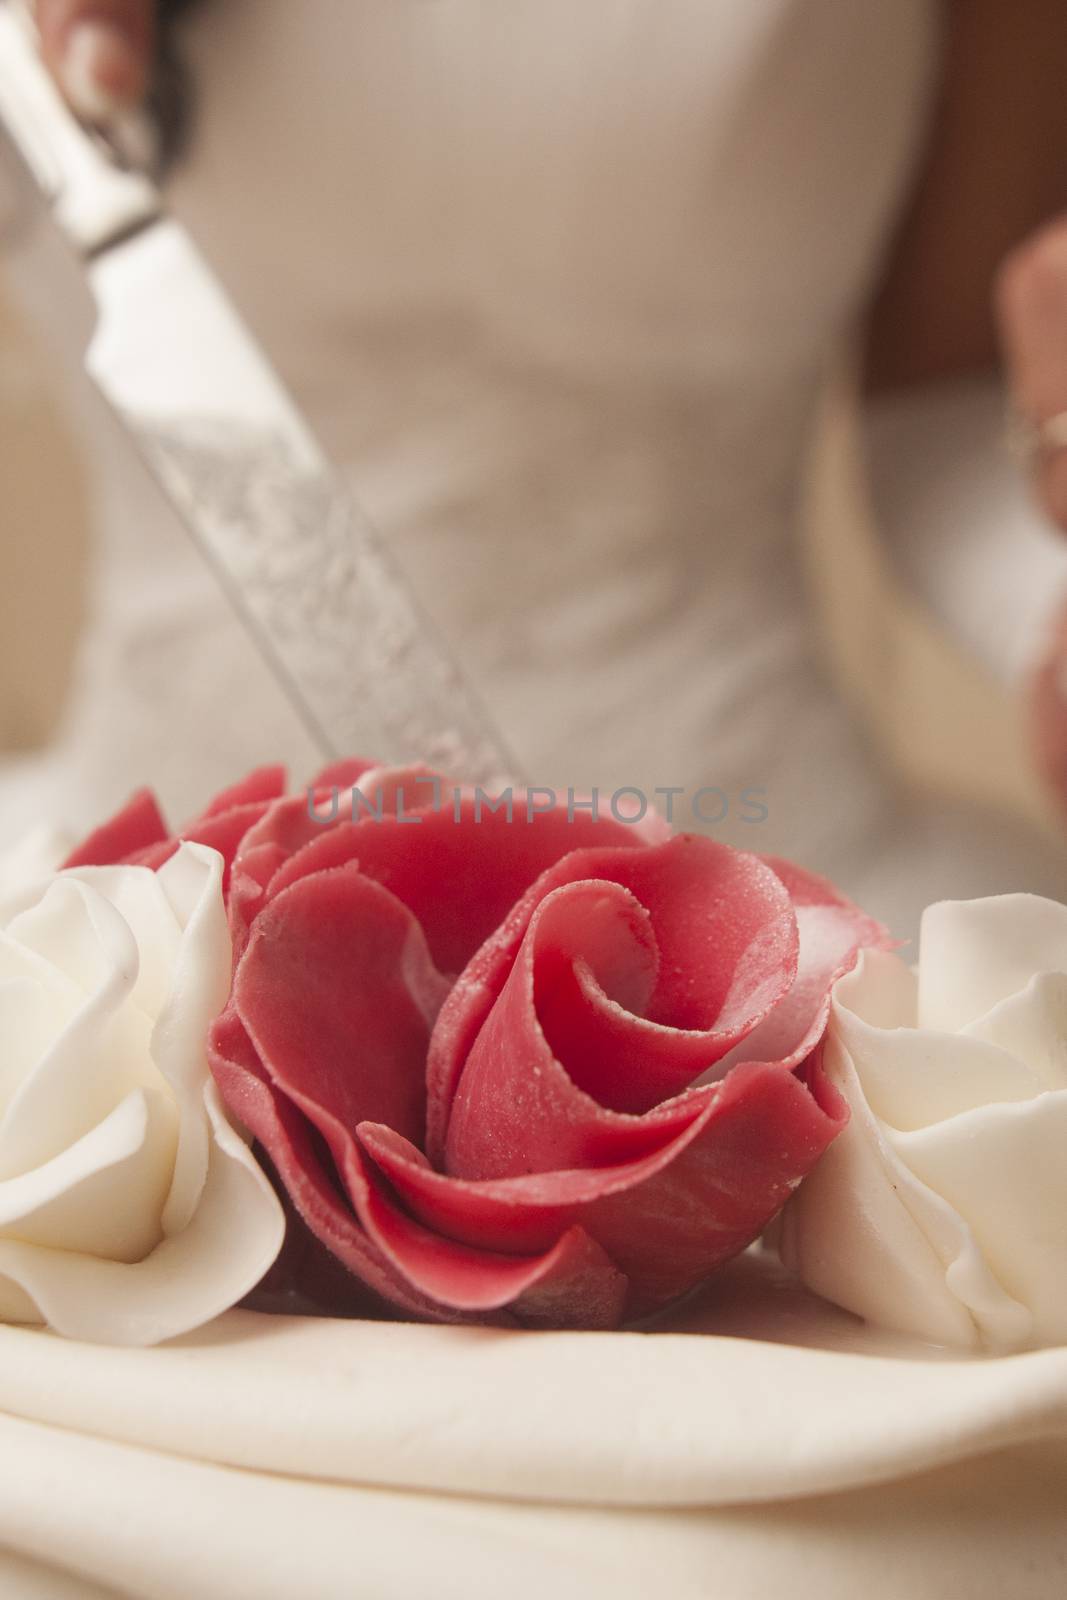 marzipan red rose on wedding cake by johnqsbf